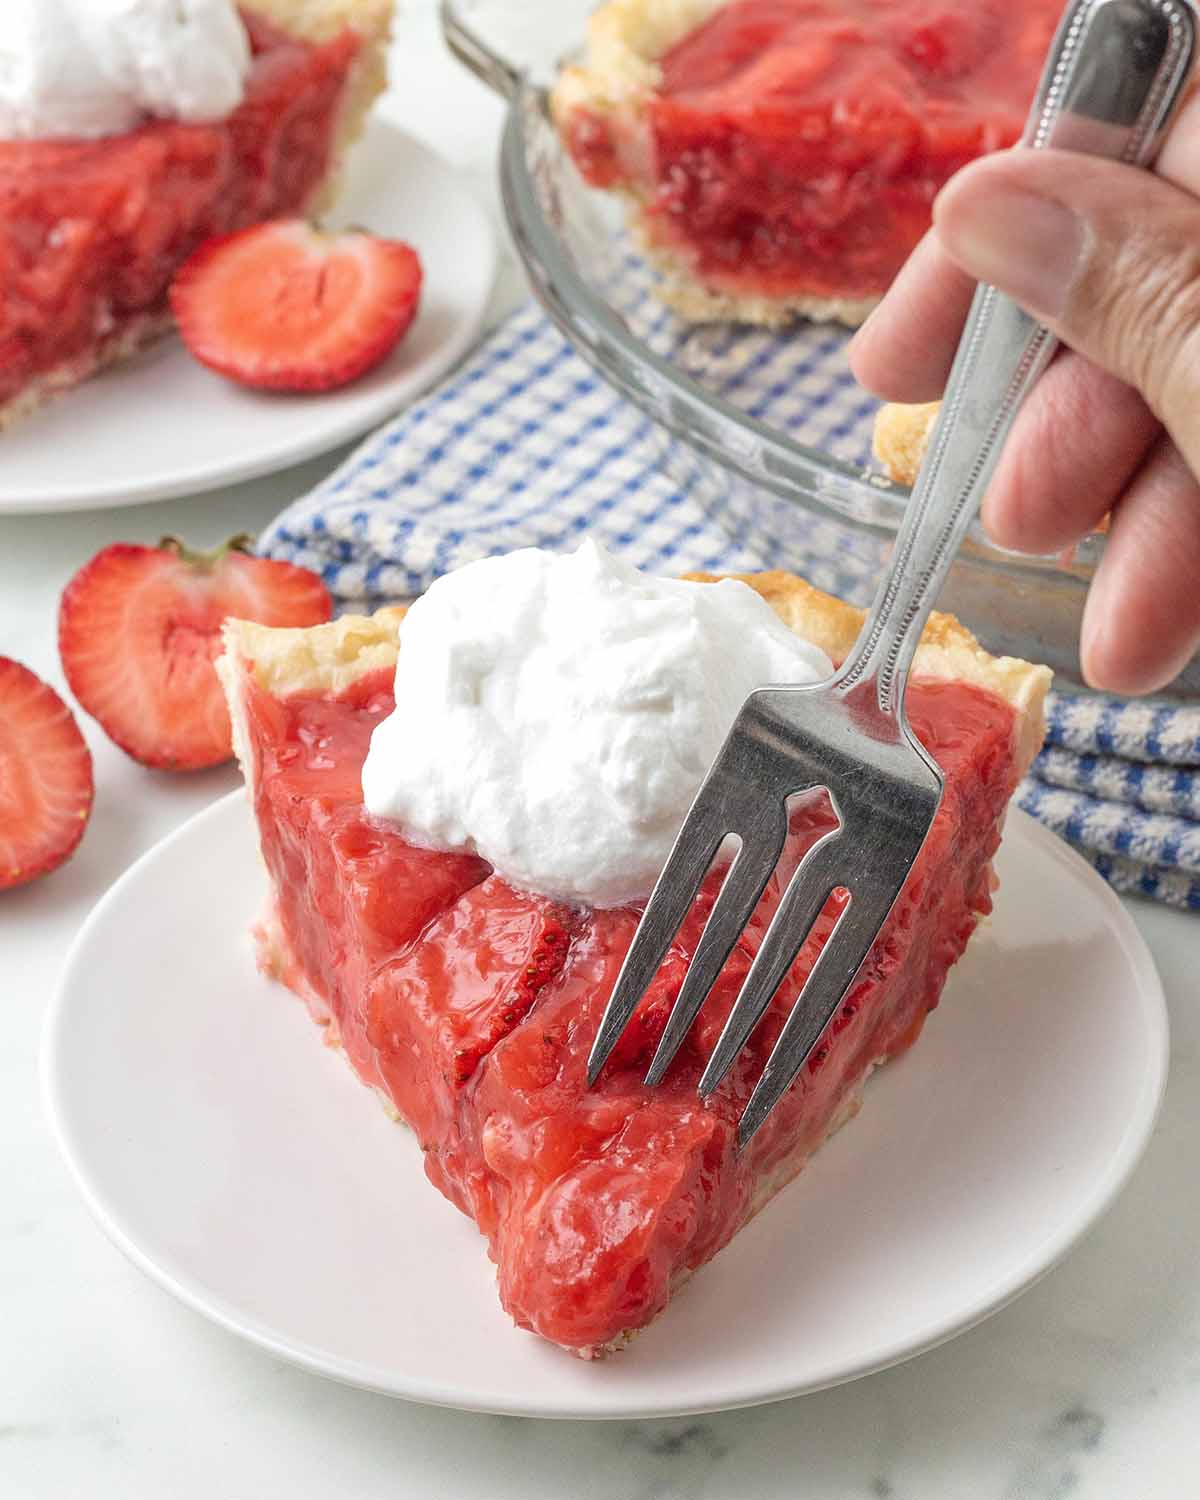 A fork taking a piece out of a slice of fresh strawberry pie.